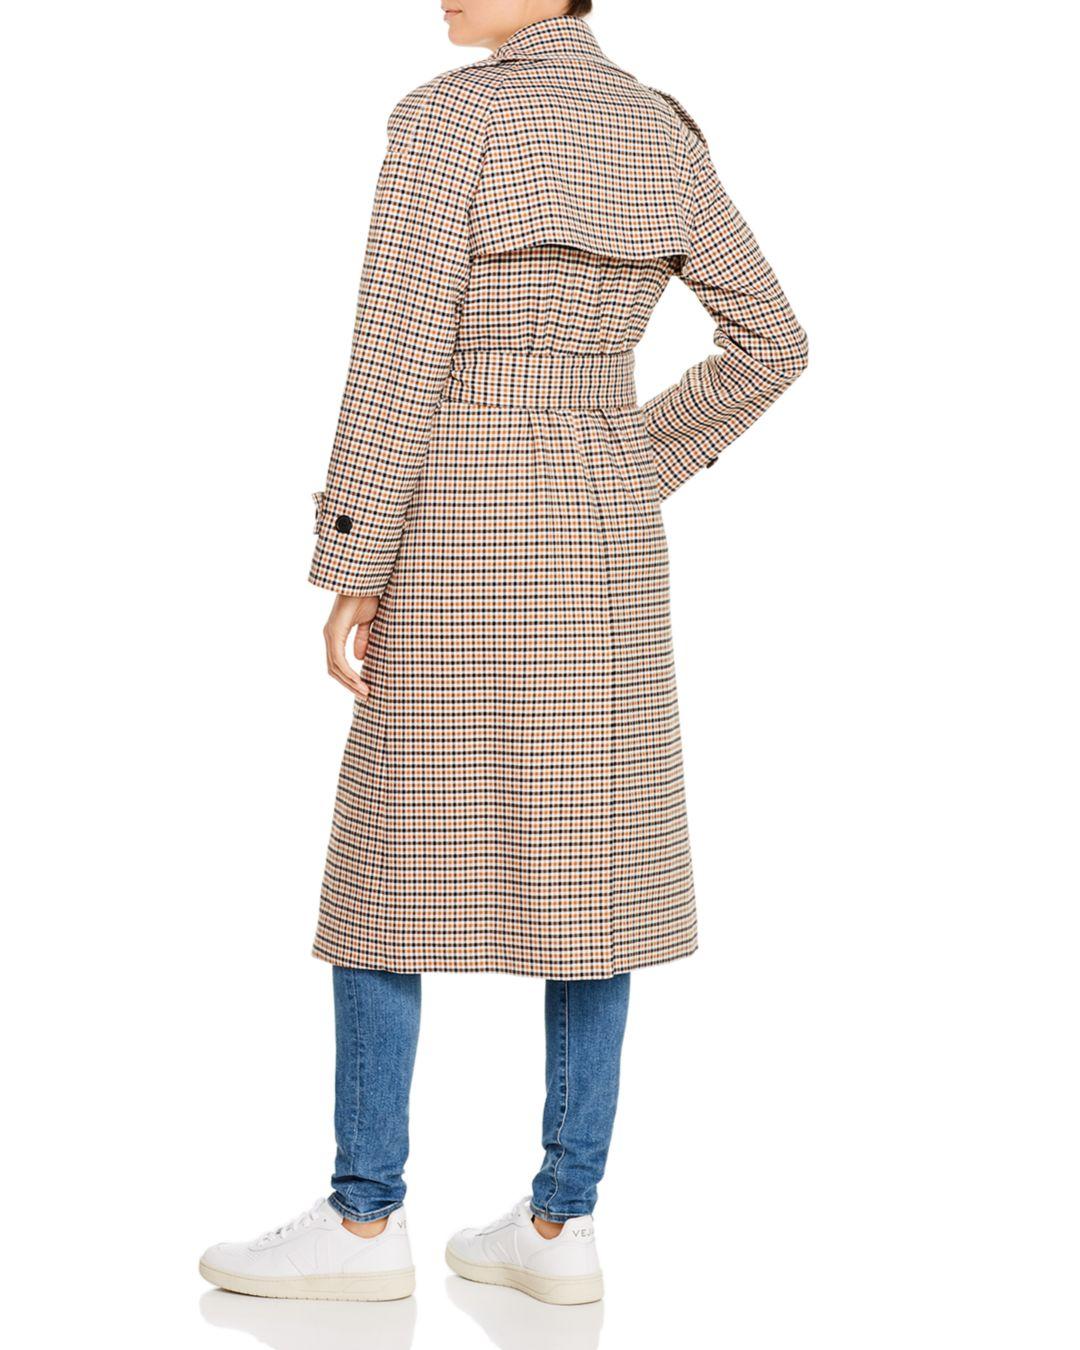 Anine Bing London Plaid Trench Coat in Yellow | Lyst